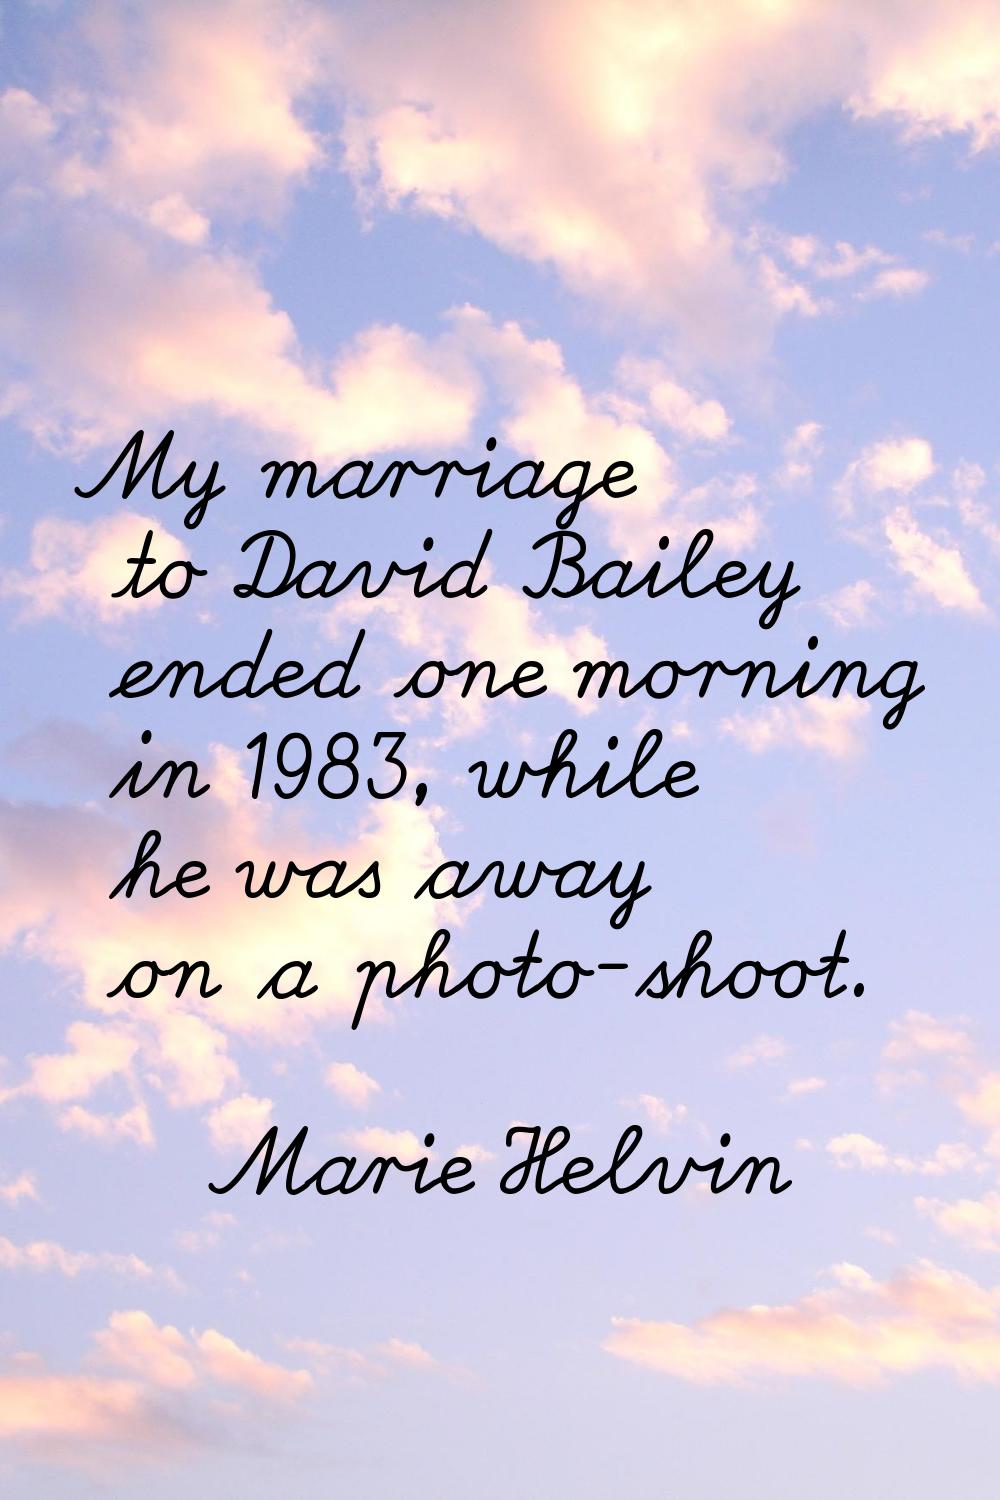 My marriage to David Bailey ended one morning in 1983, while he was away on a photo-shoot.